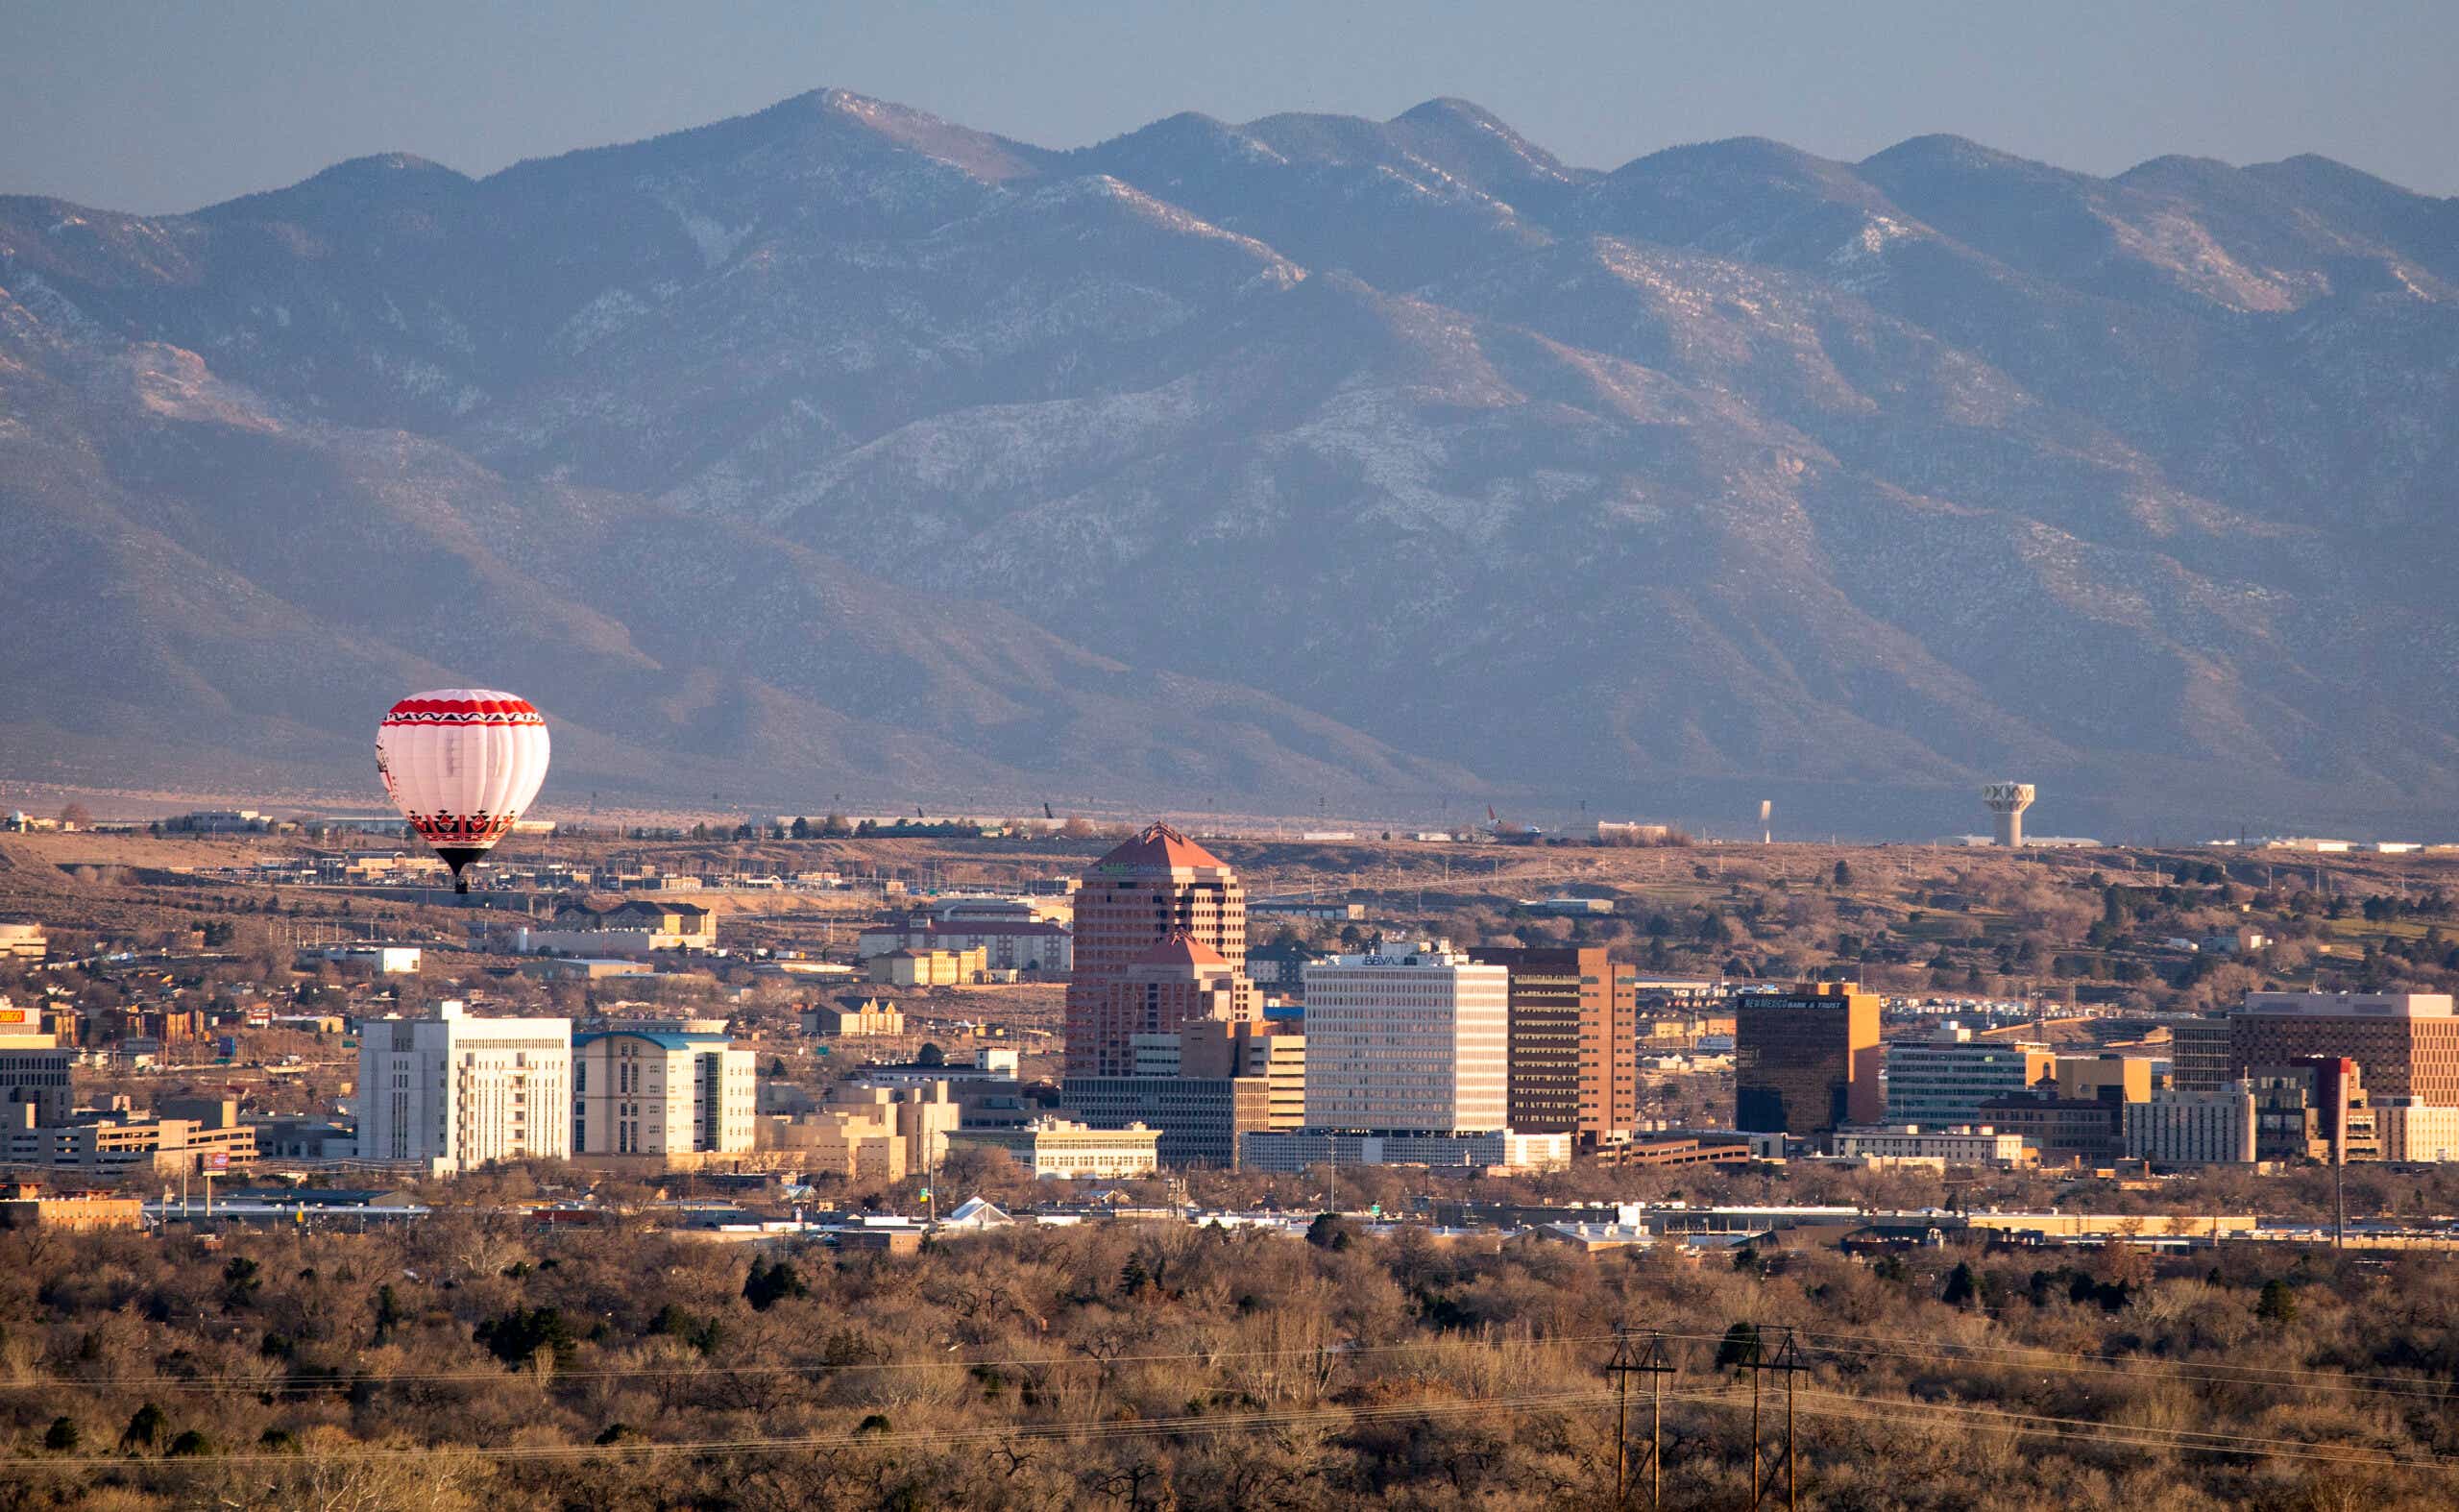 A hot air balloon floats over the skyscrapers of downtown Albuquerque, New Mexico.